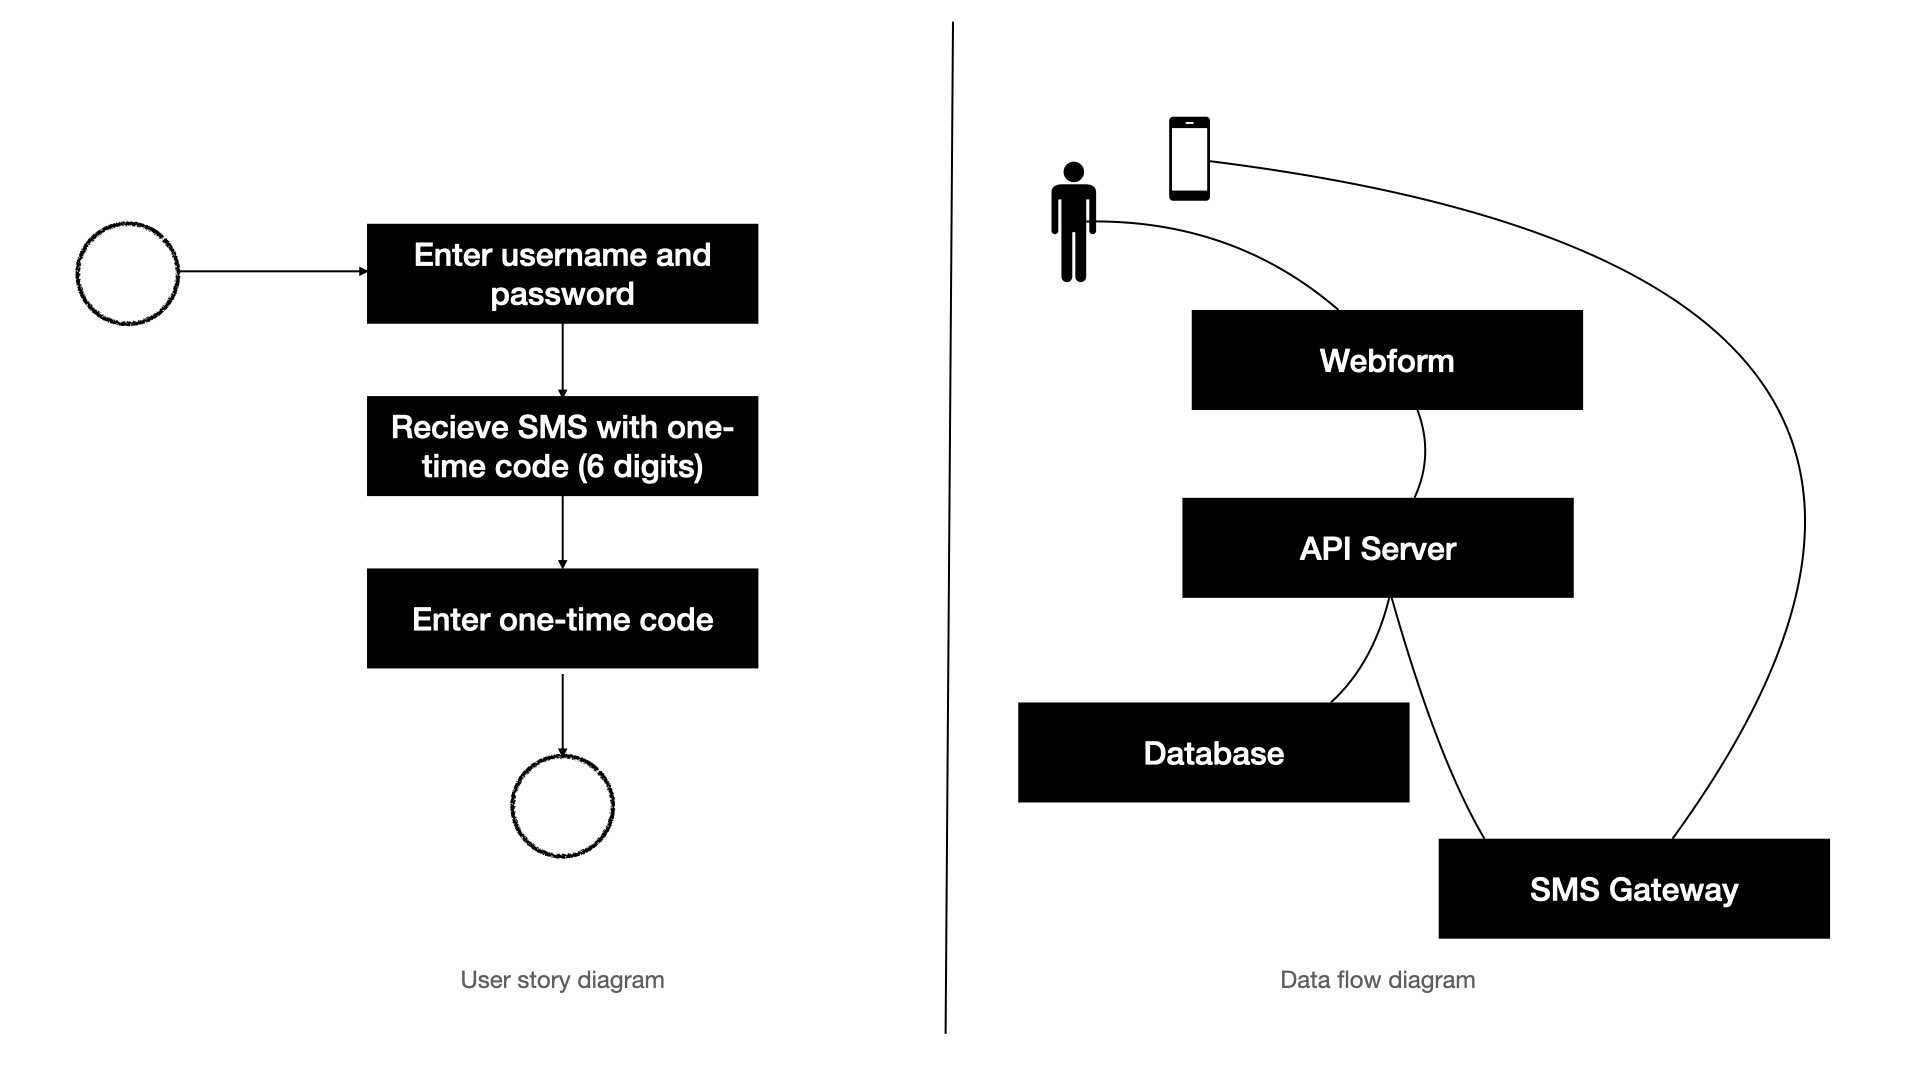 User story and data flow diagram